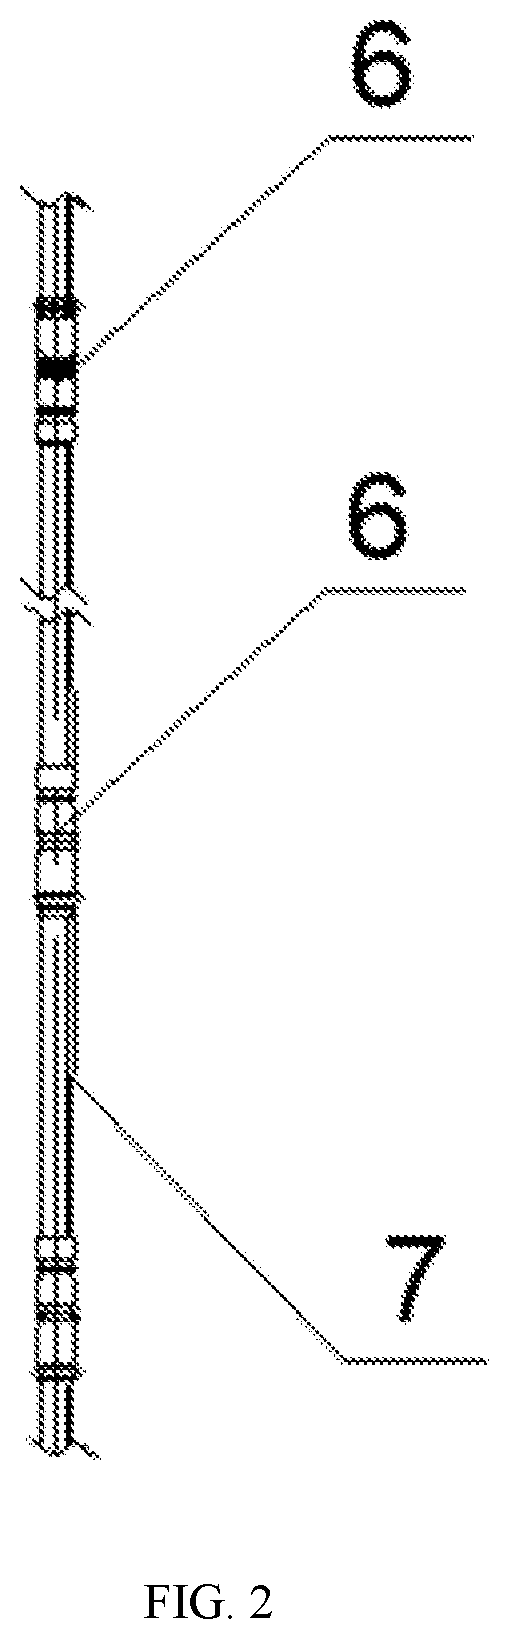 Fracturing device for extraction of coalbed methane in low permeability reservoir